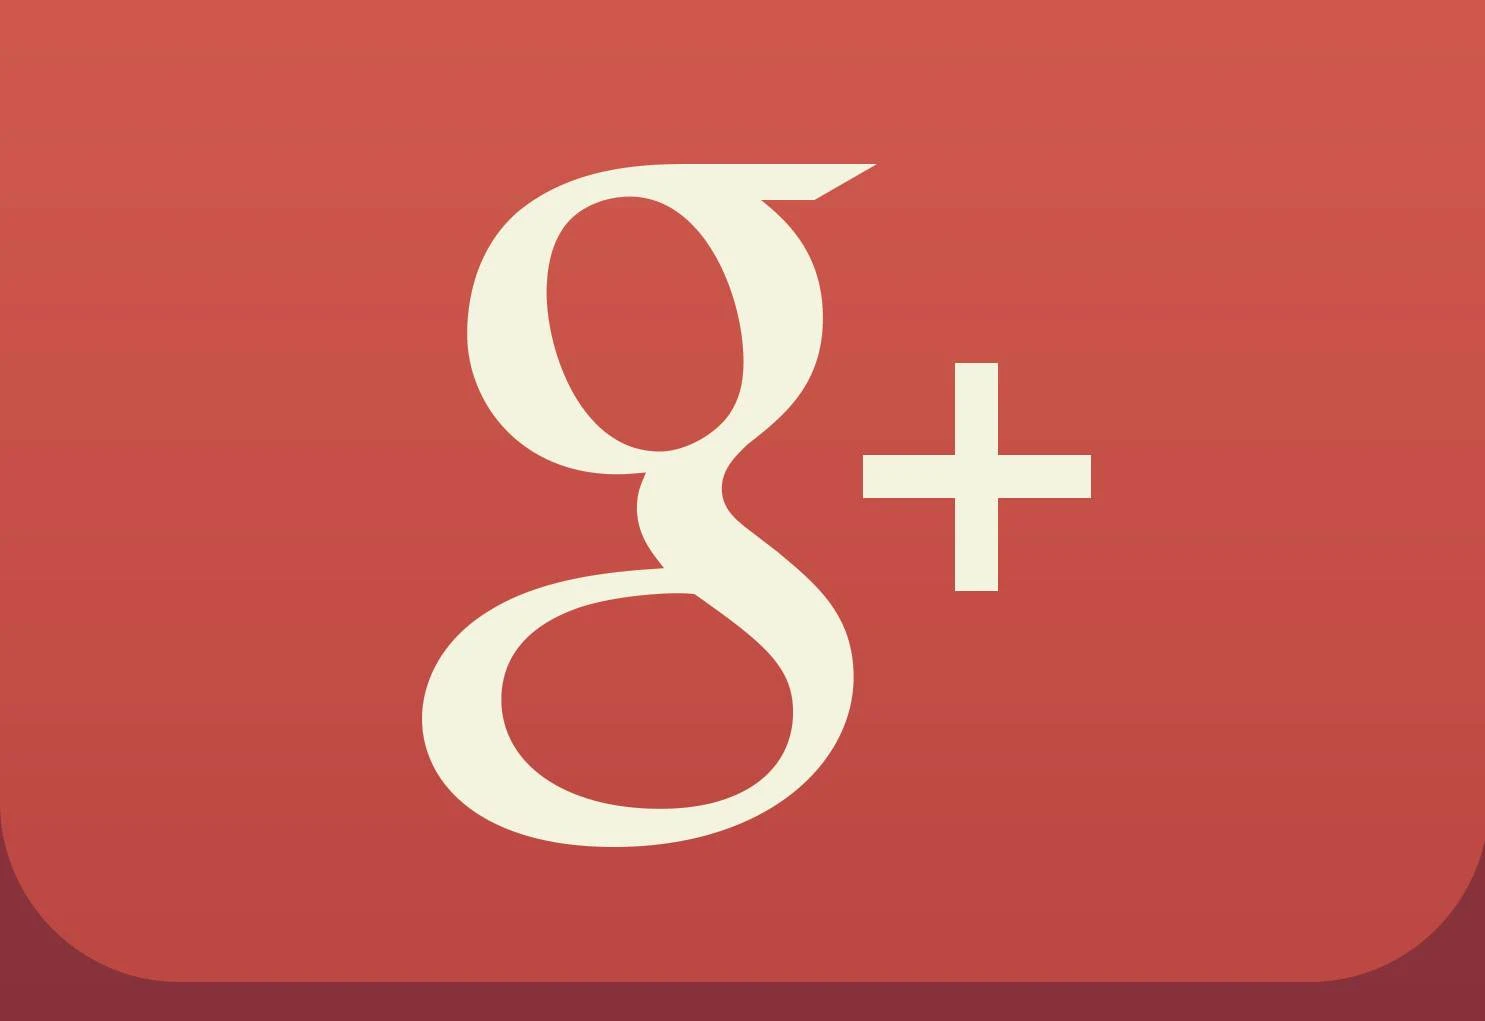 Why should i use Googleplus as a business [Infographic]